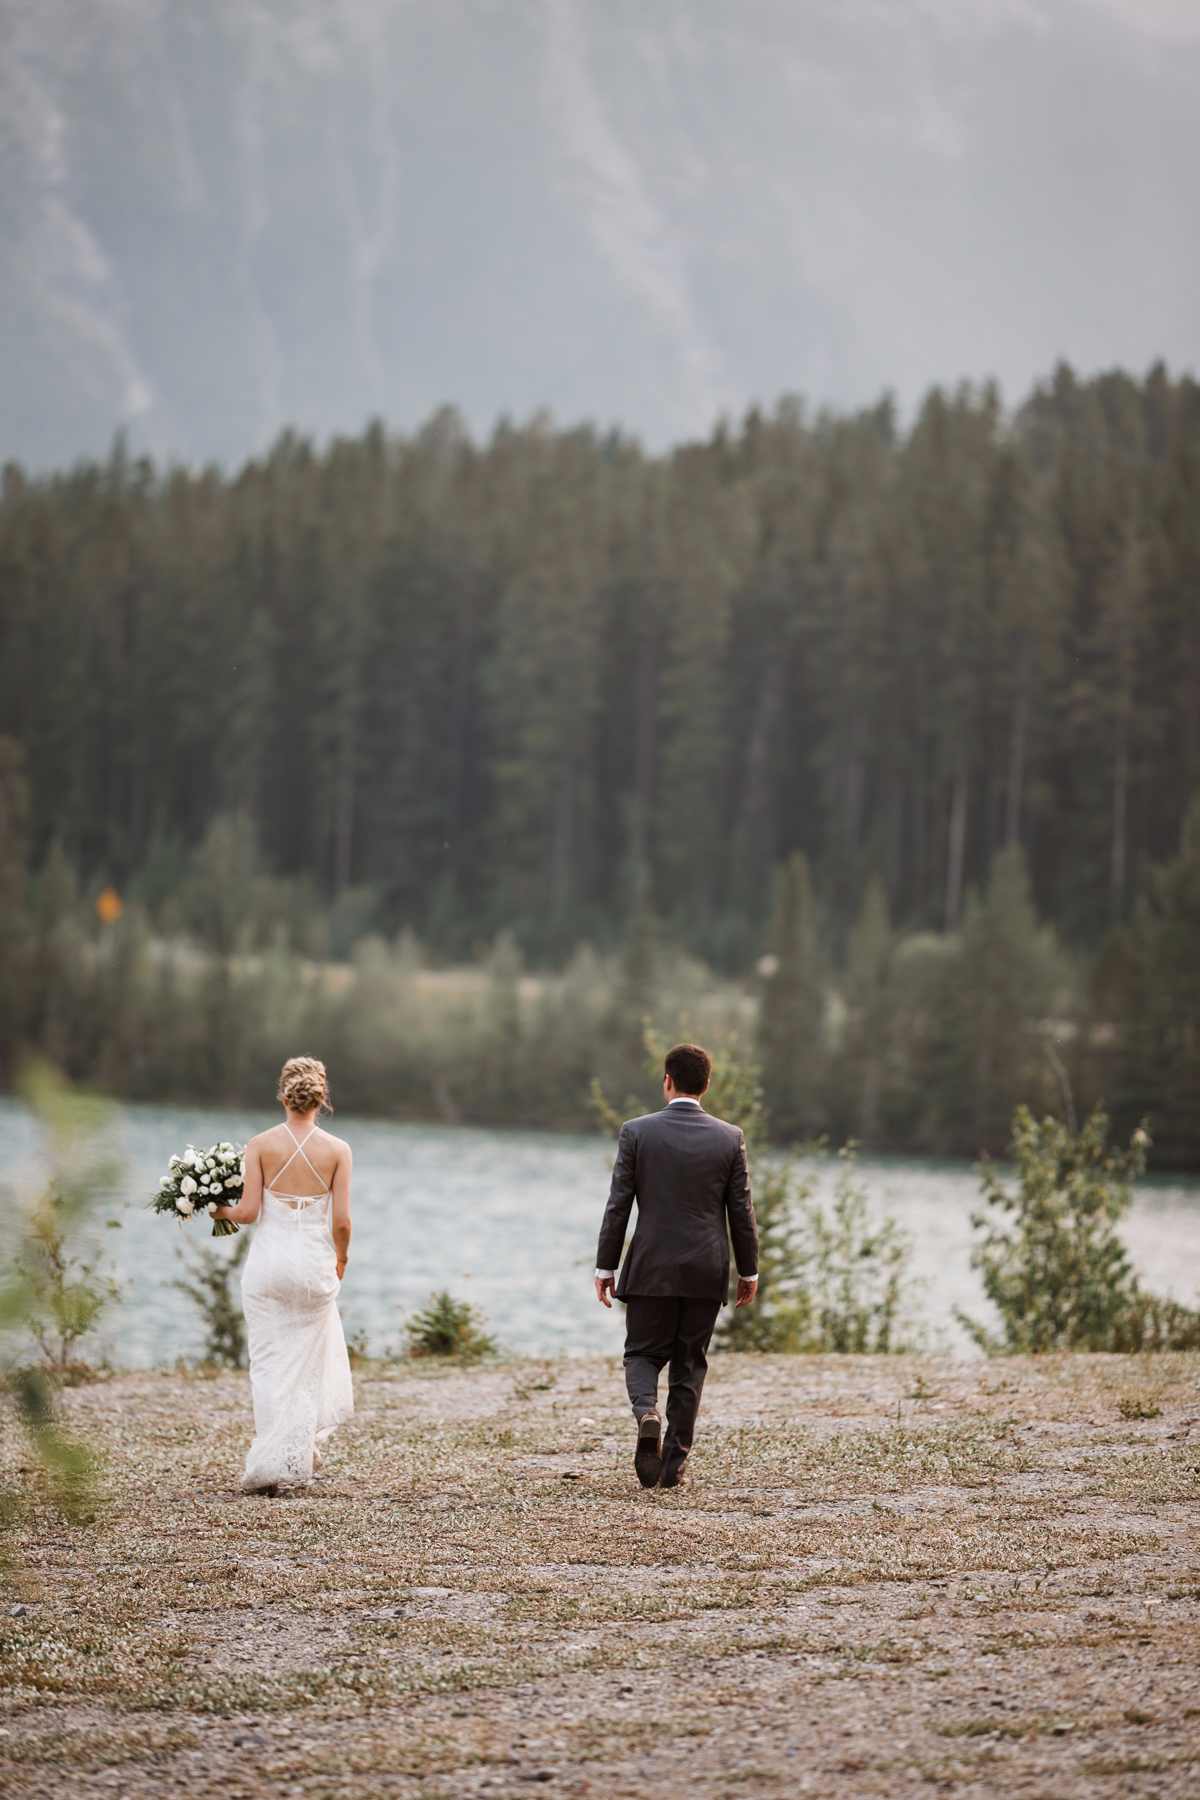 Calgary wedding photographer at Canmore and Banff destination elopement wedding in rocky mountains, Alberta, Canada - Photo 17